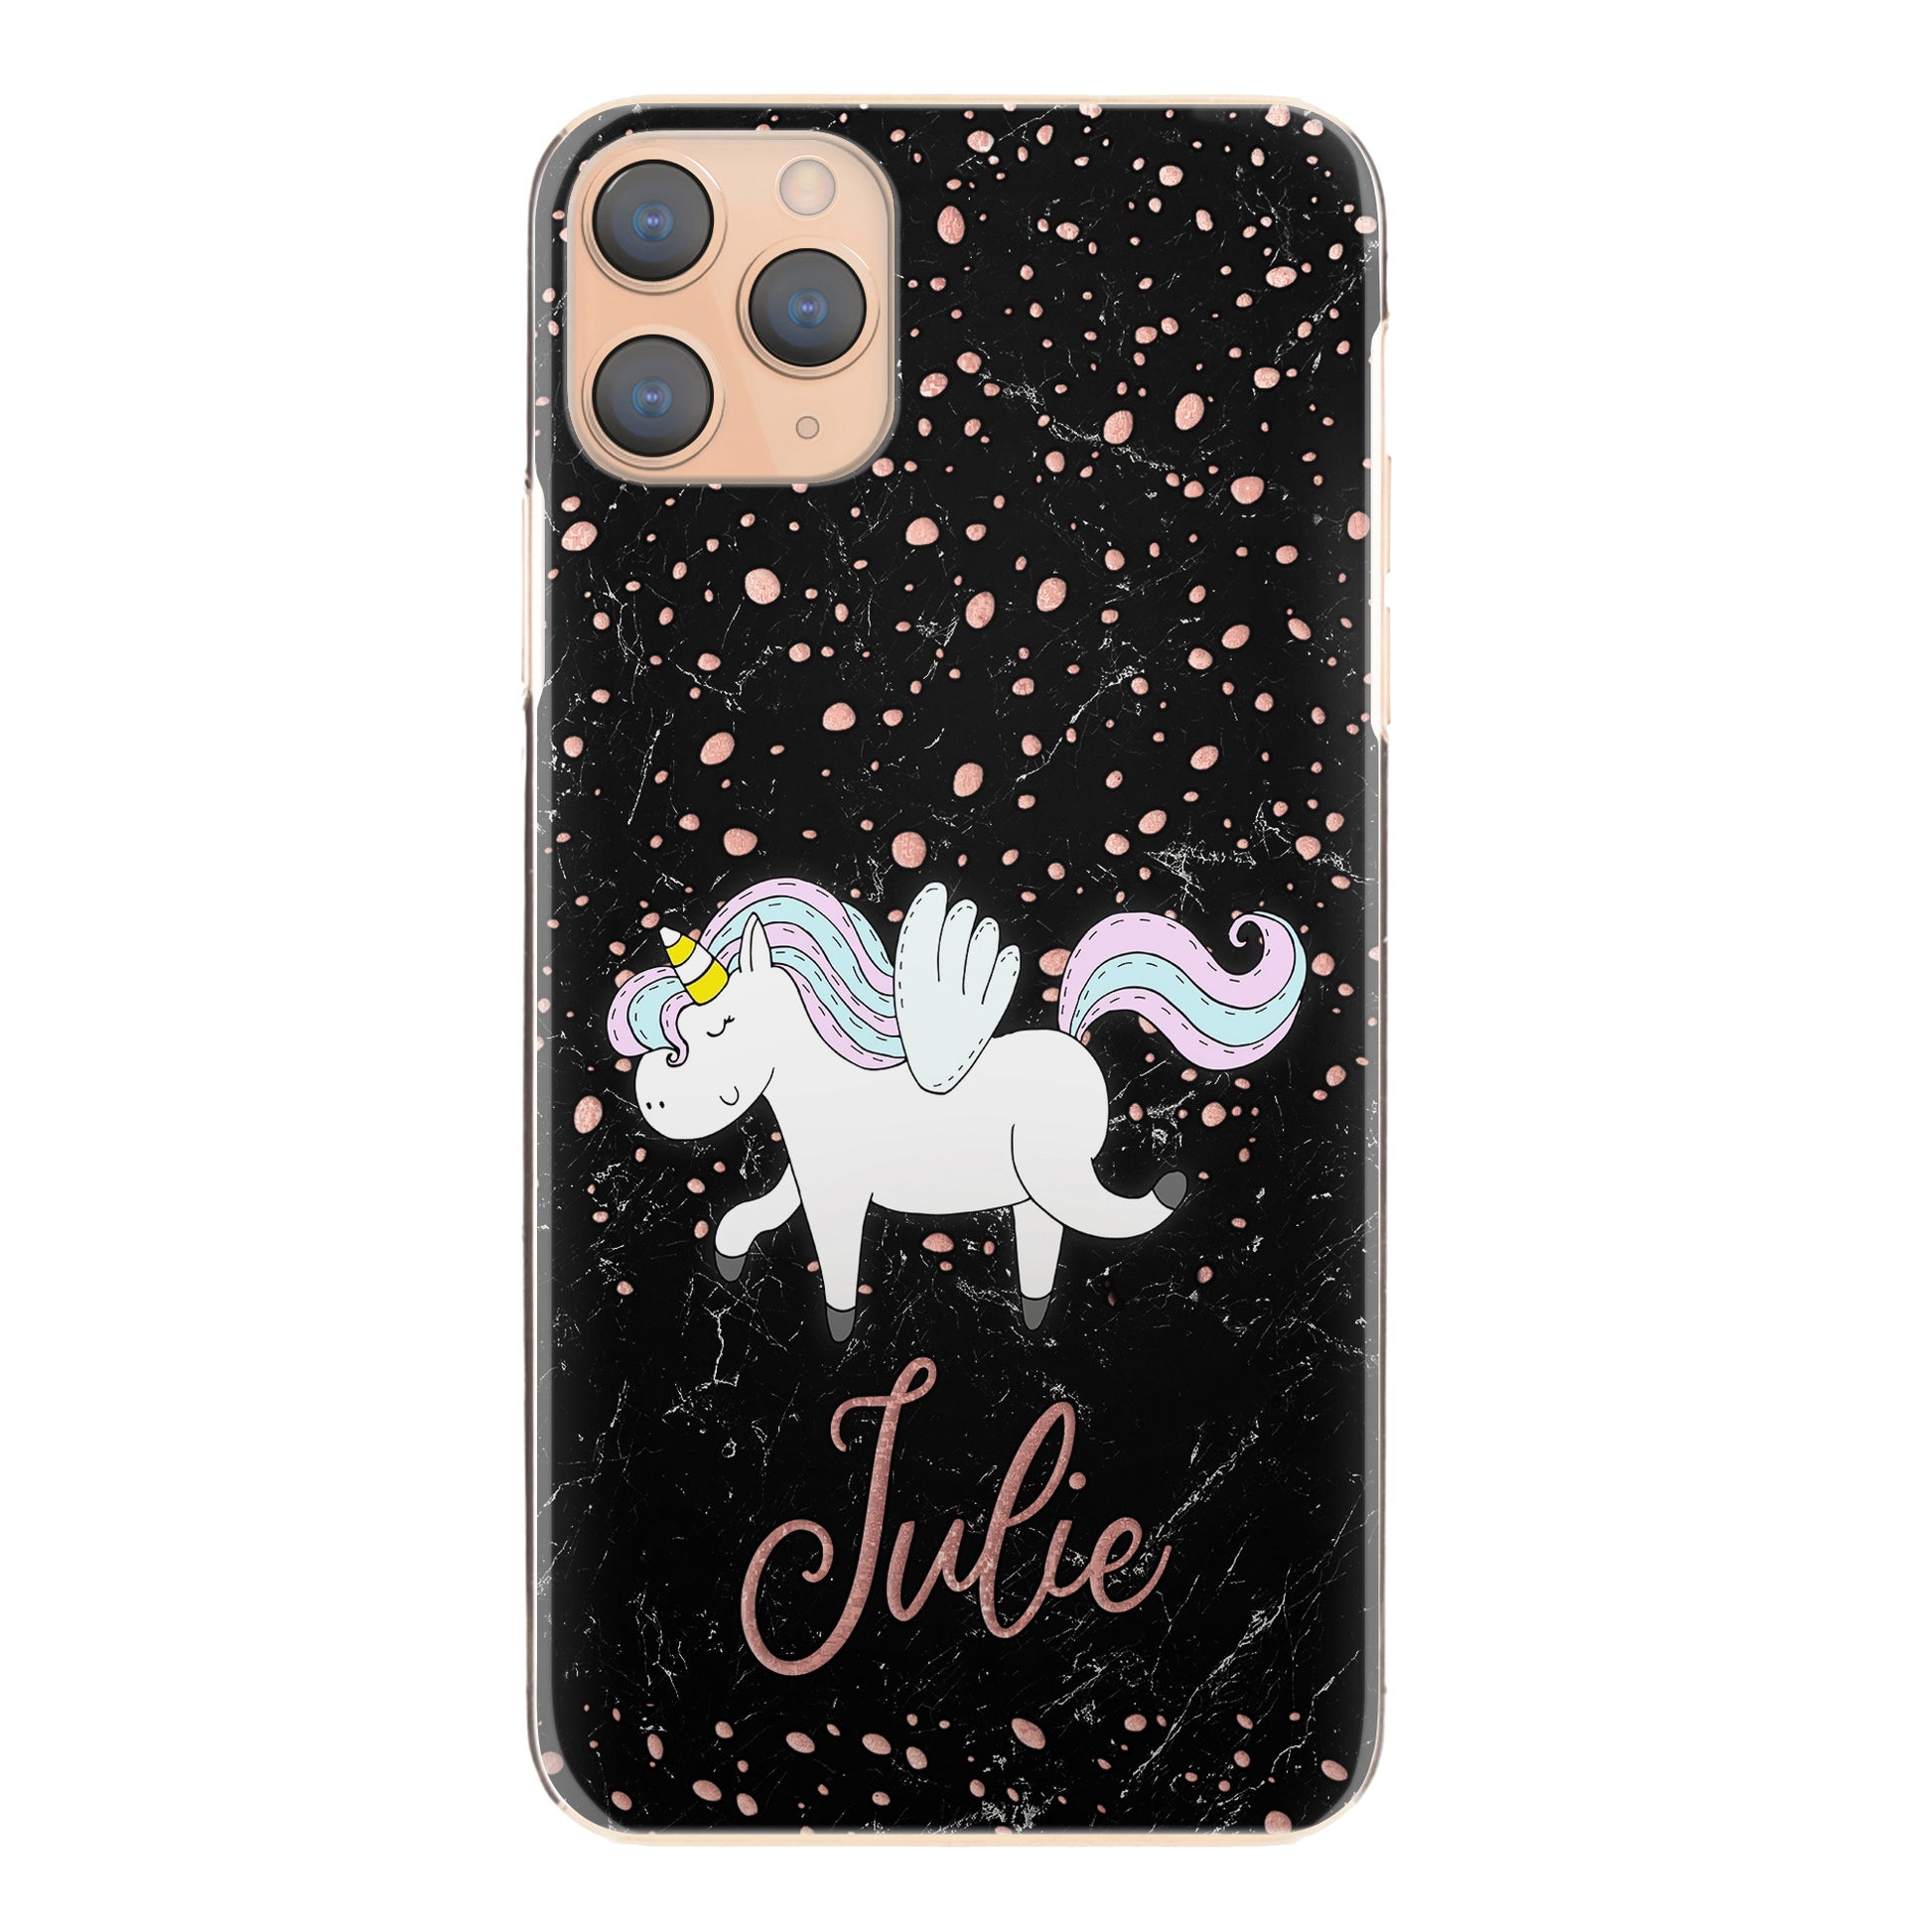 Personalised HTC Phone Hard Case with Winged Unicorn and Pink Text on Black Marble